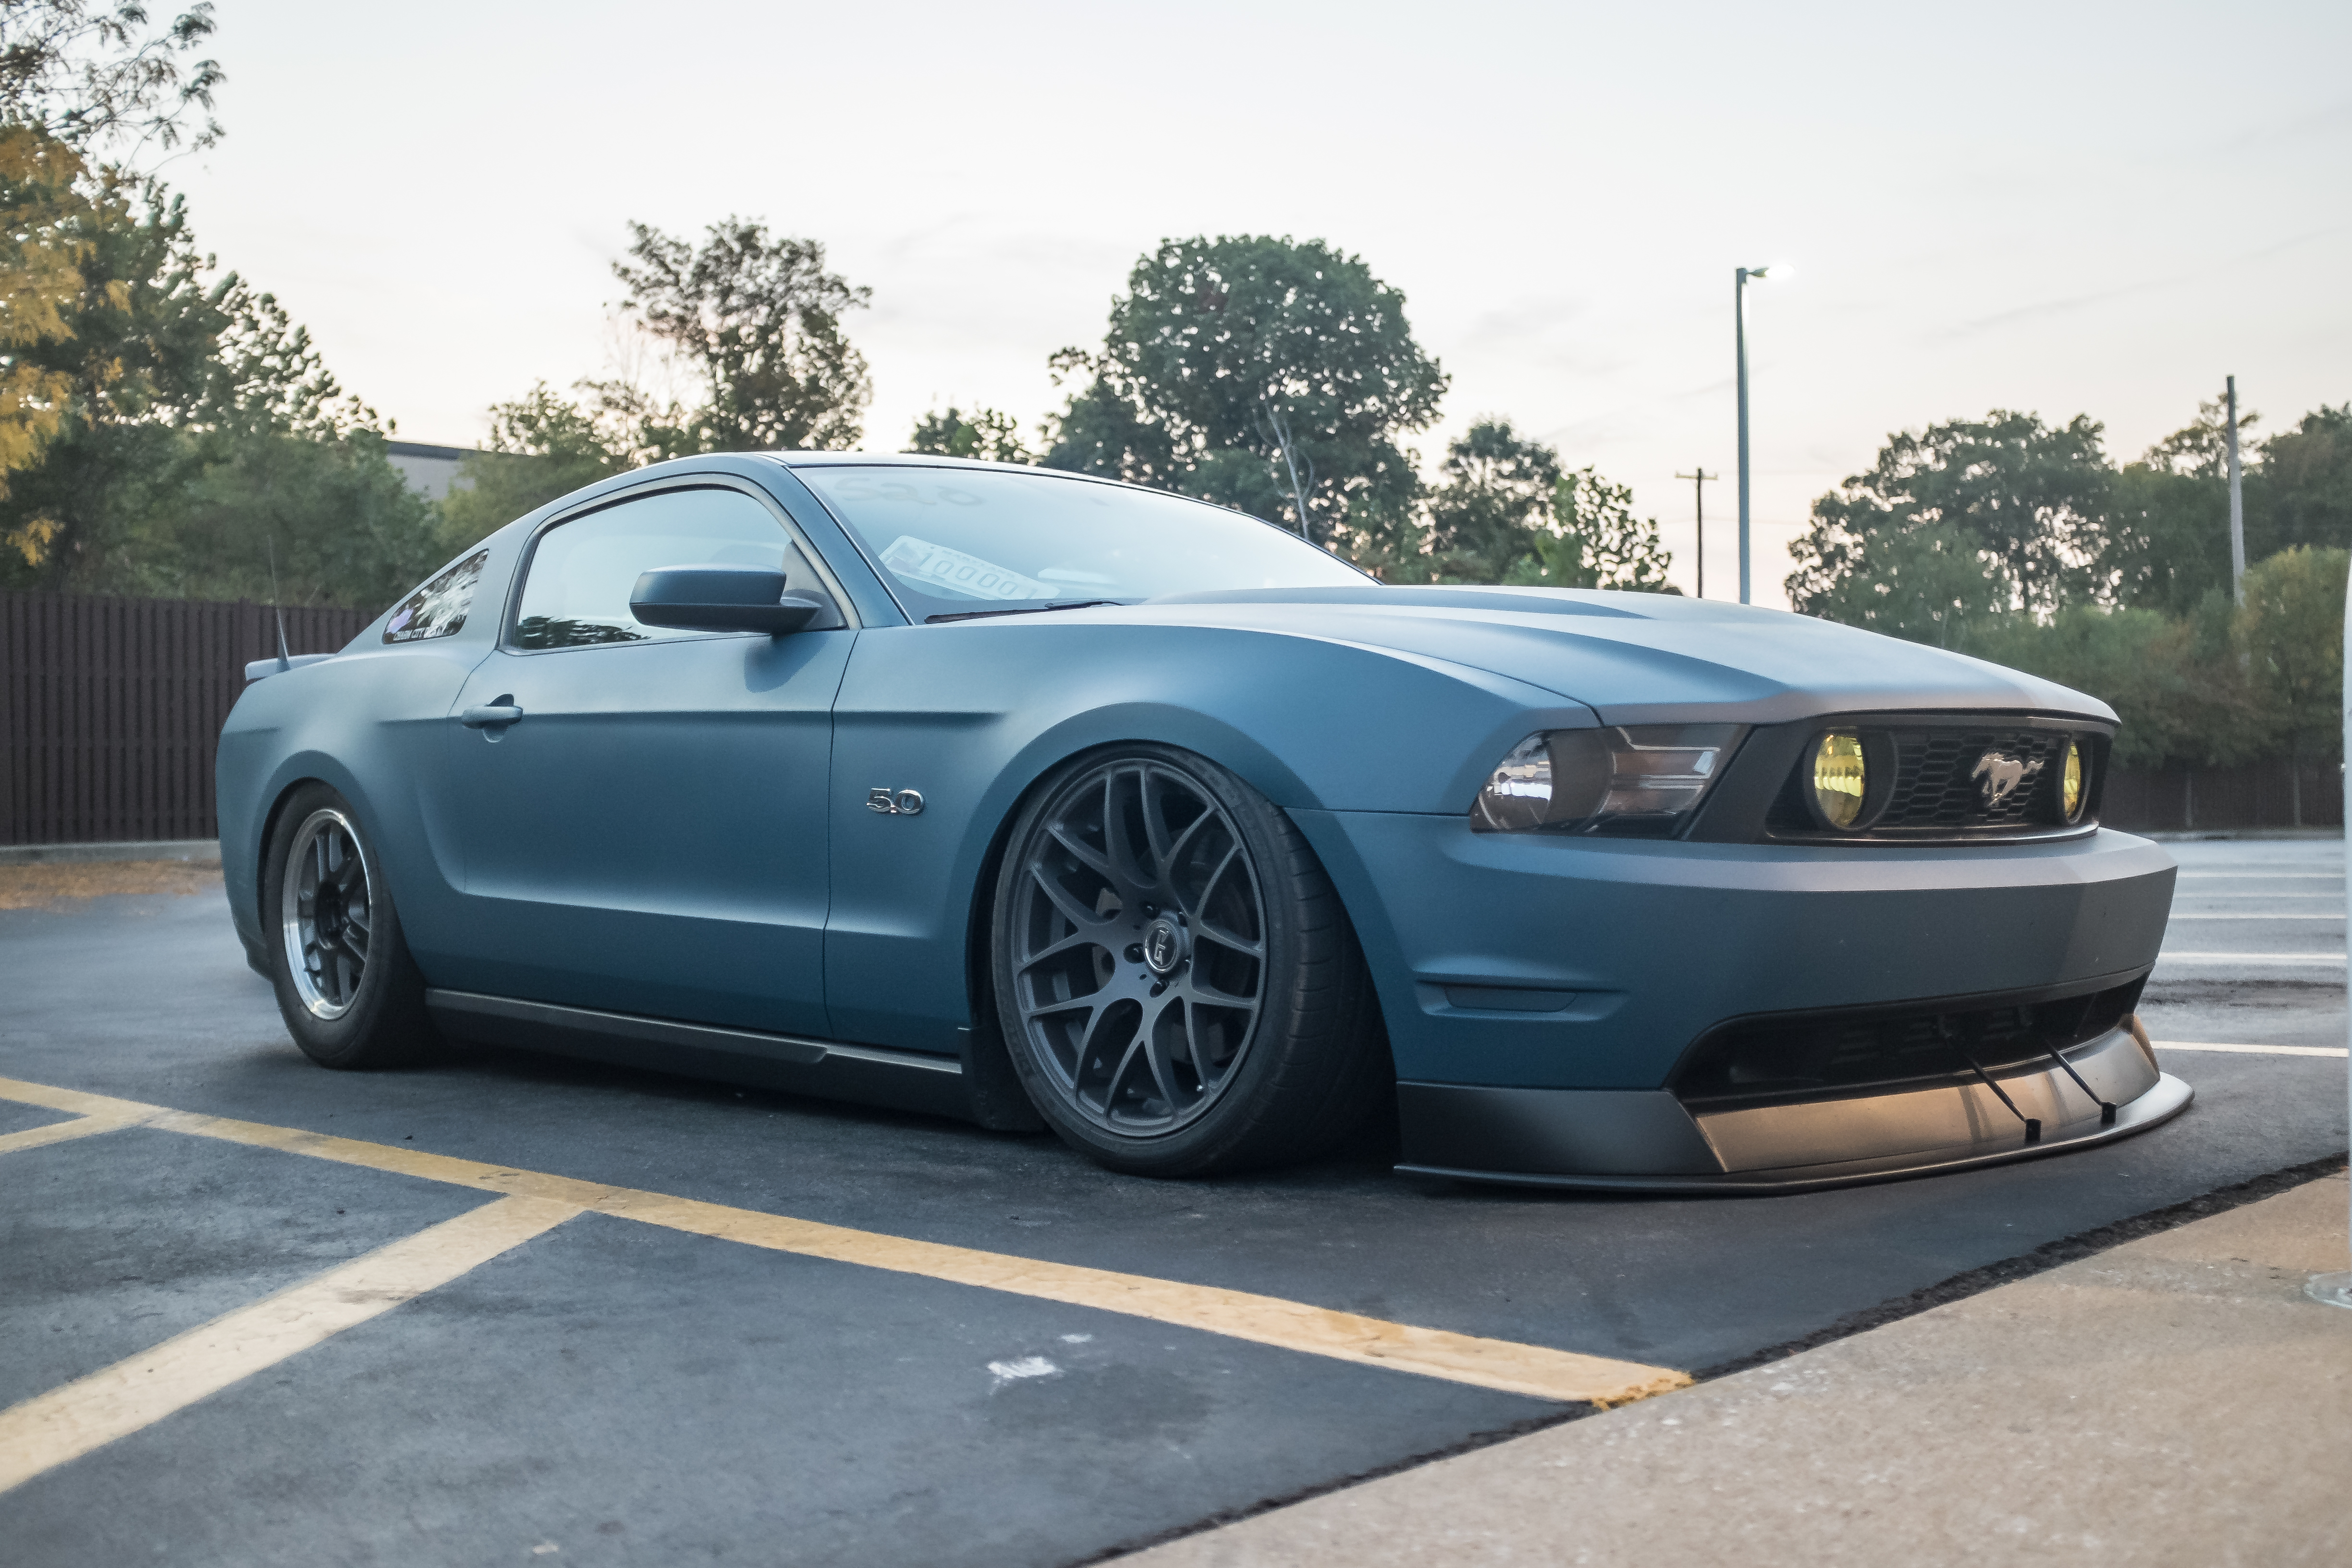 Car Ford Ford Mustang Shelby Gt Muscle Car Tuning 4896x3264